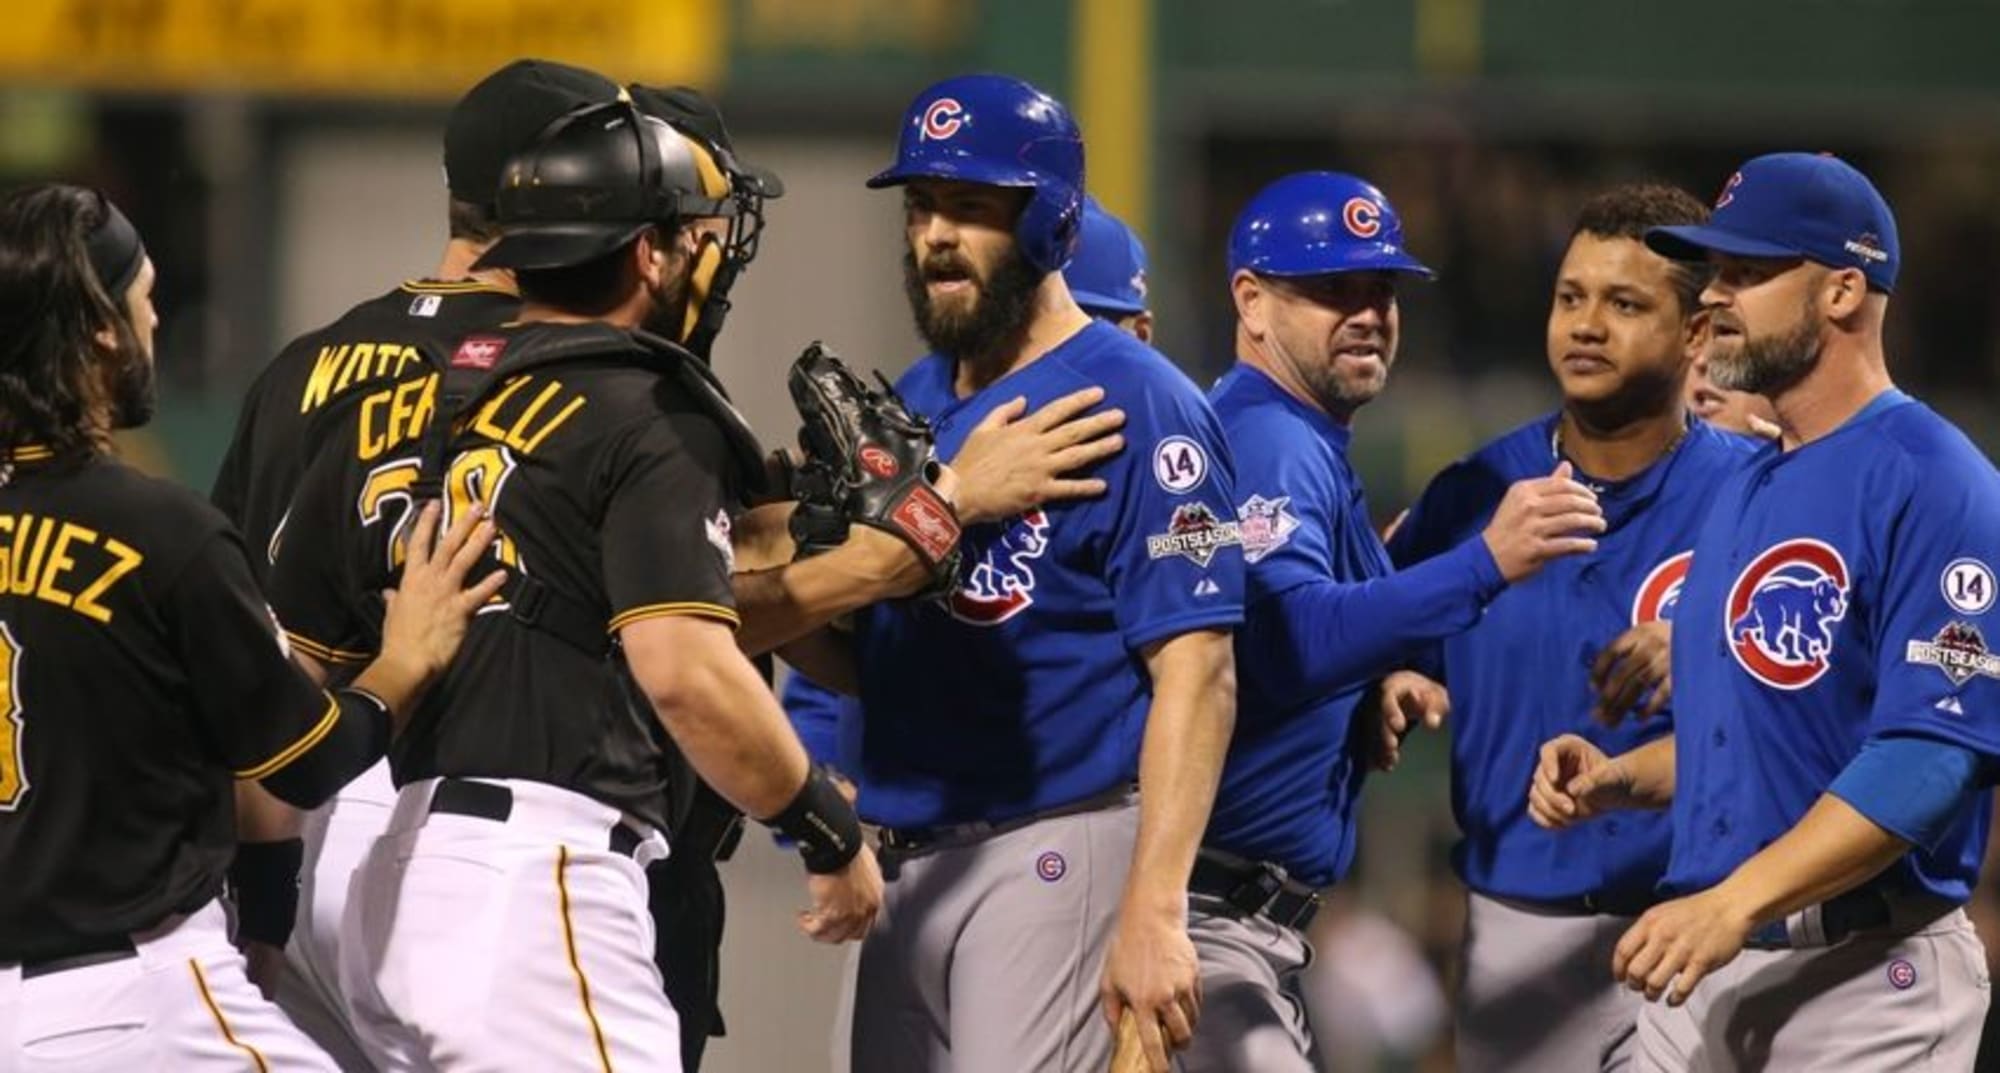 Pittsburgh Pirates Face Cubs For First Time Since W.C. Game